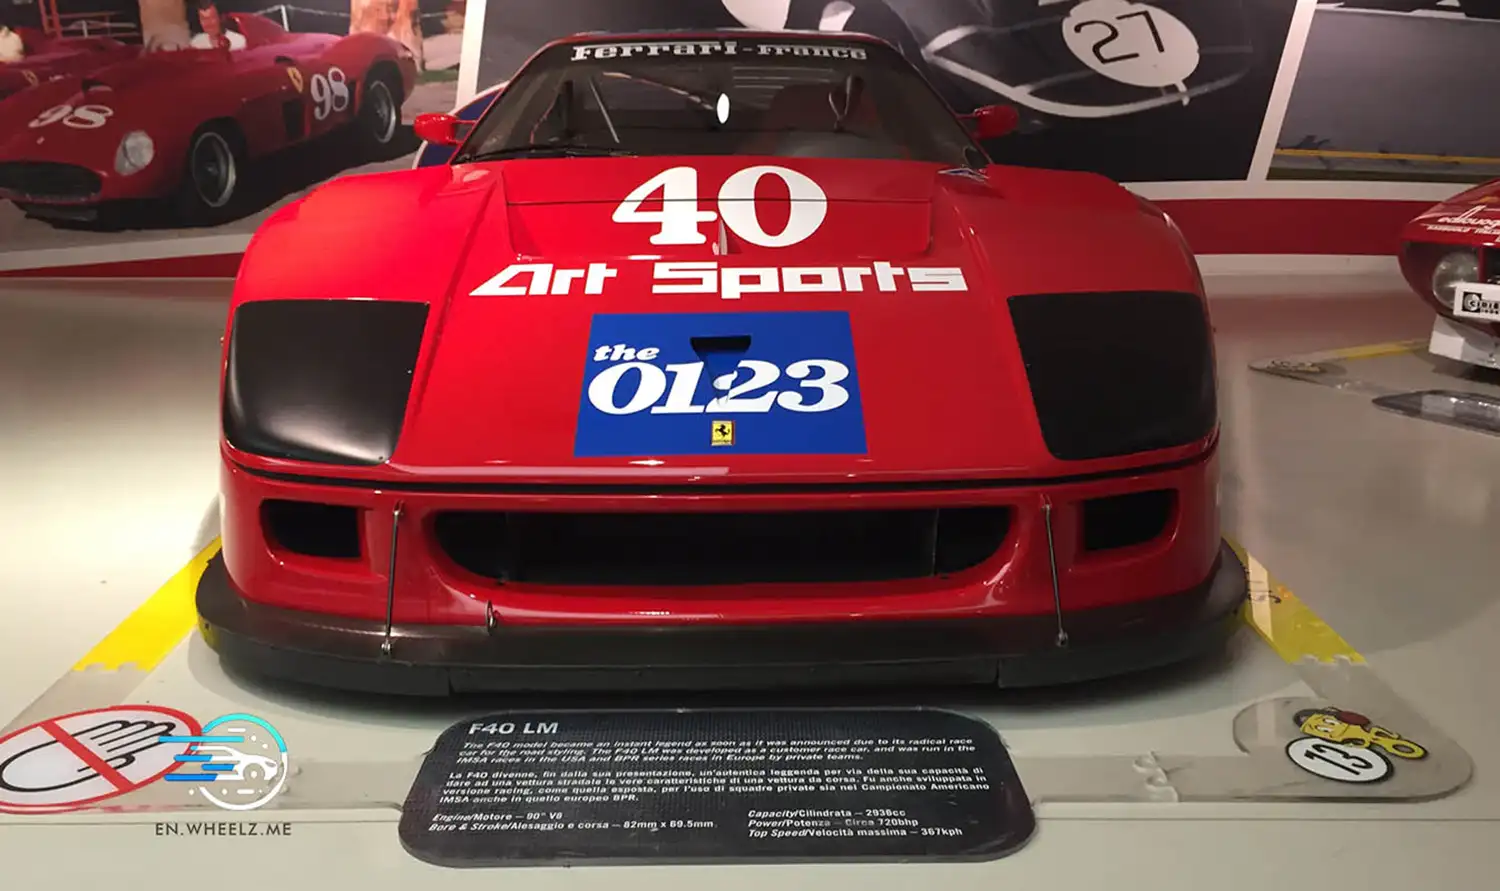 Ferrari F40 LM: Engineering Excellence on the Racetrack